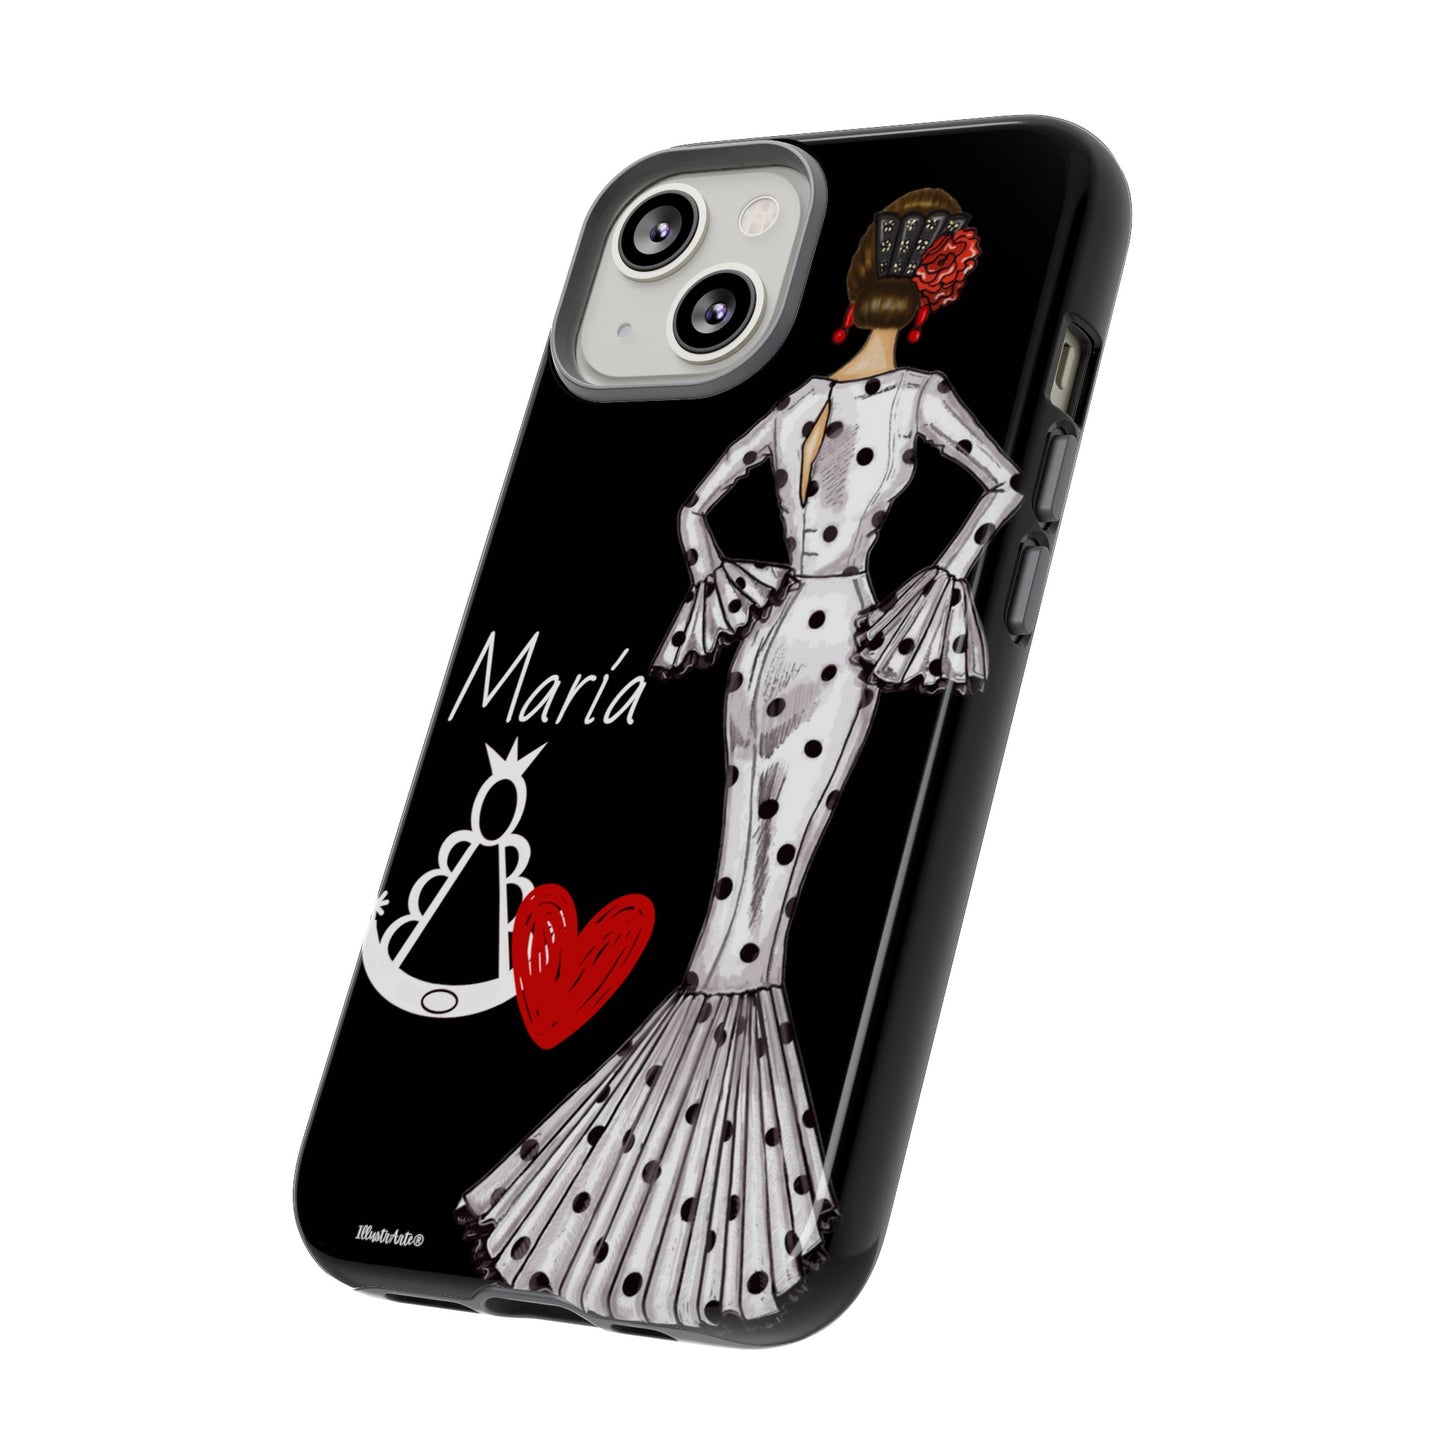 a black and white iphone case with a lady in a polka dot dress